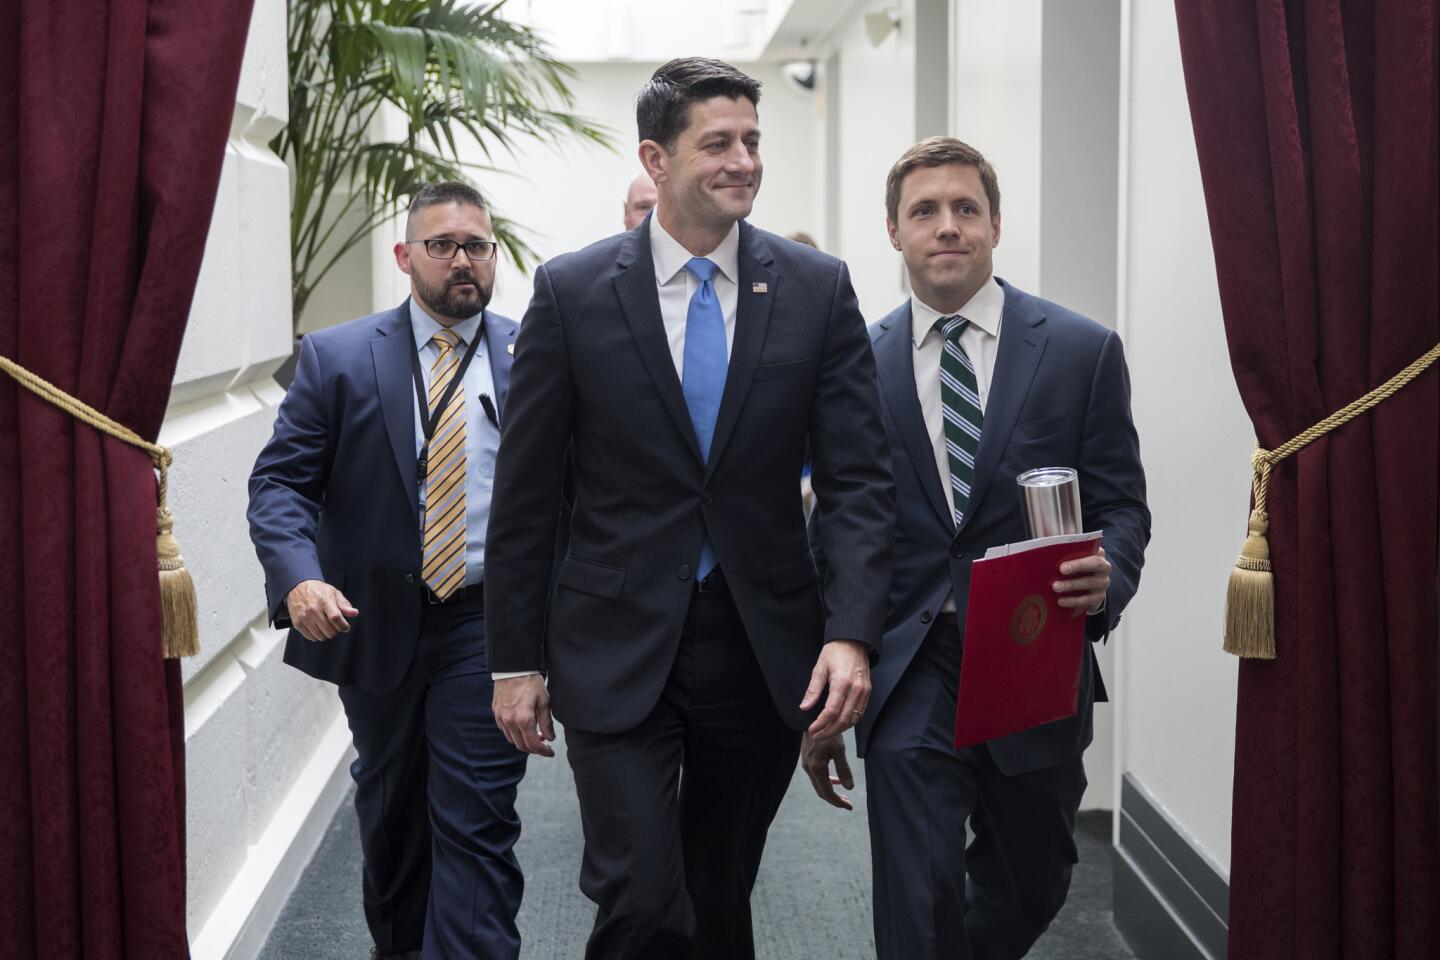 House members vote on health care bill